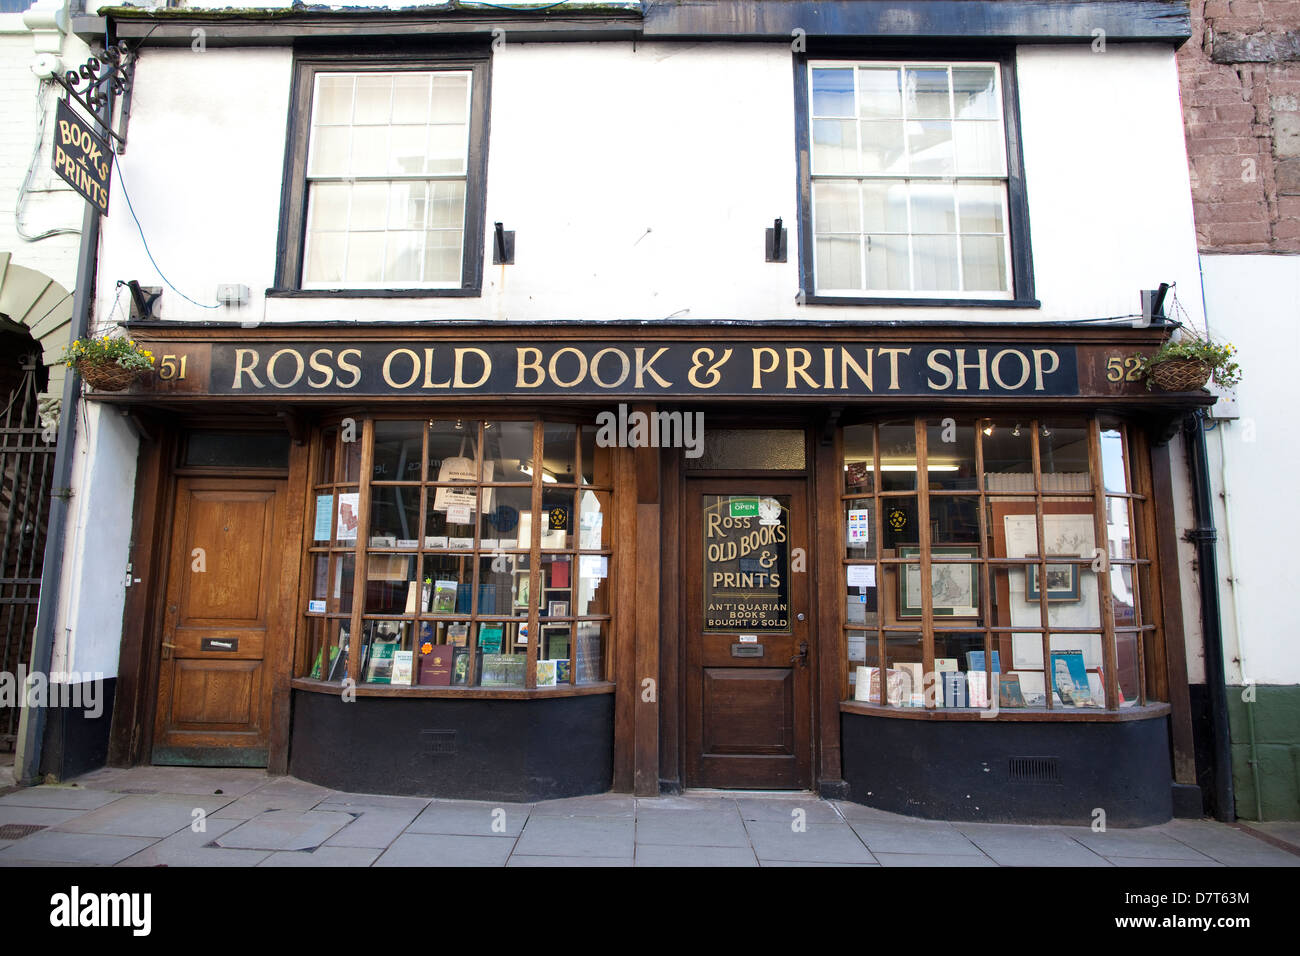 Ross Old Book and Print Shop in Ross on Wye Herefordshire, England, UK Stock Photo